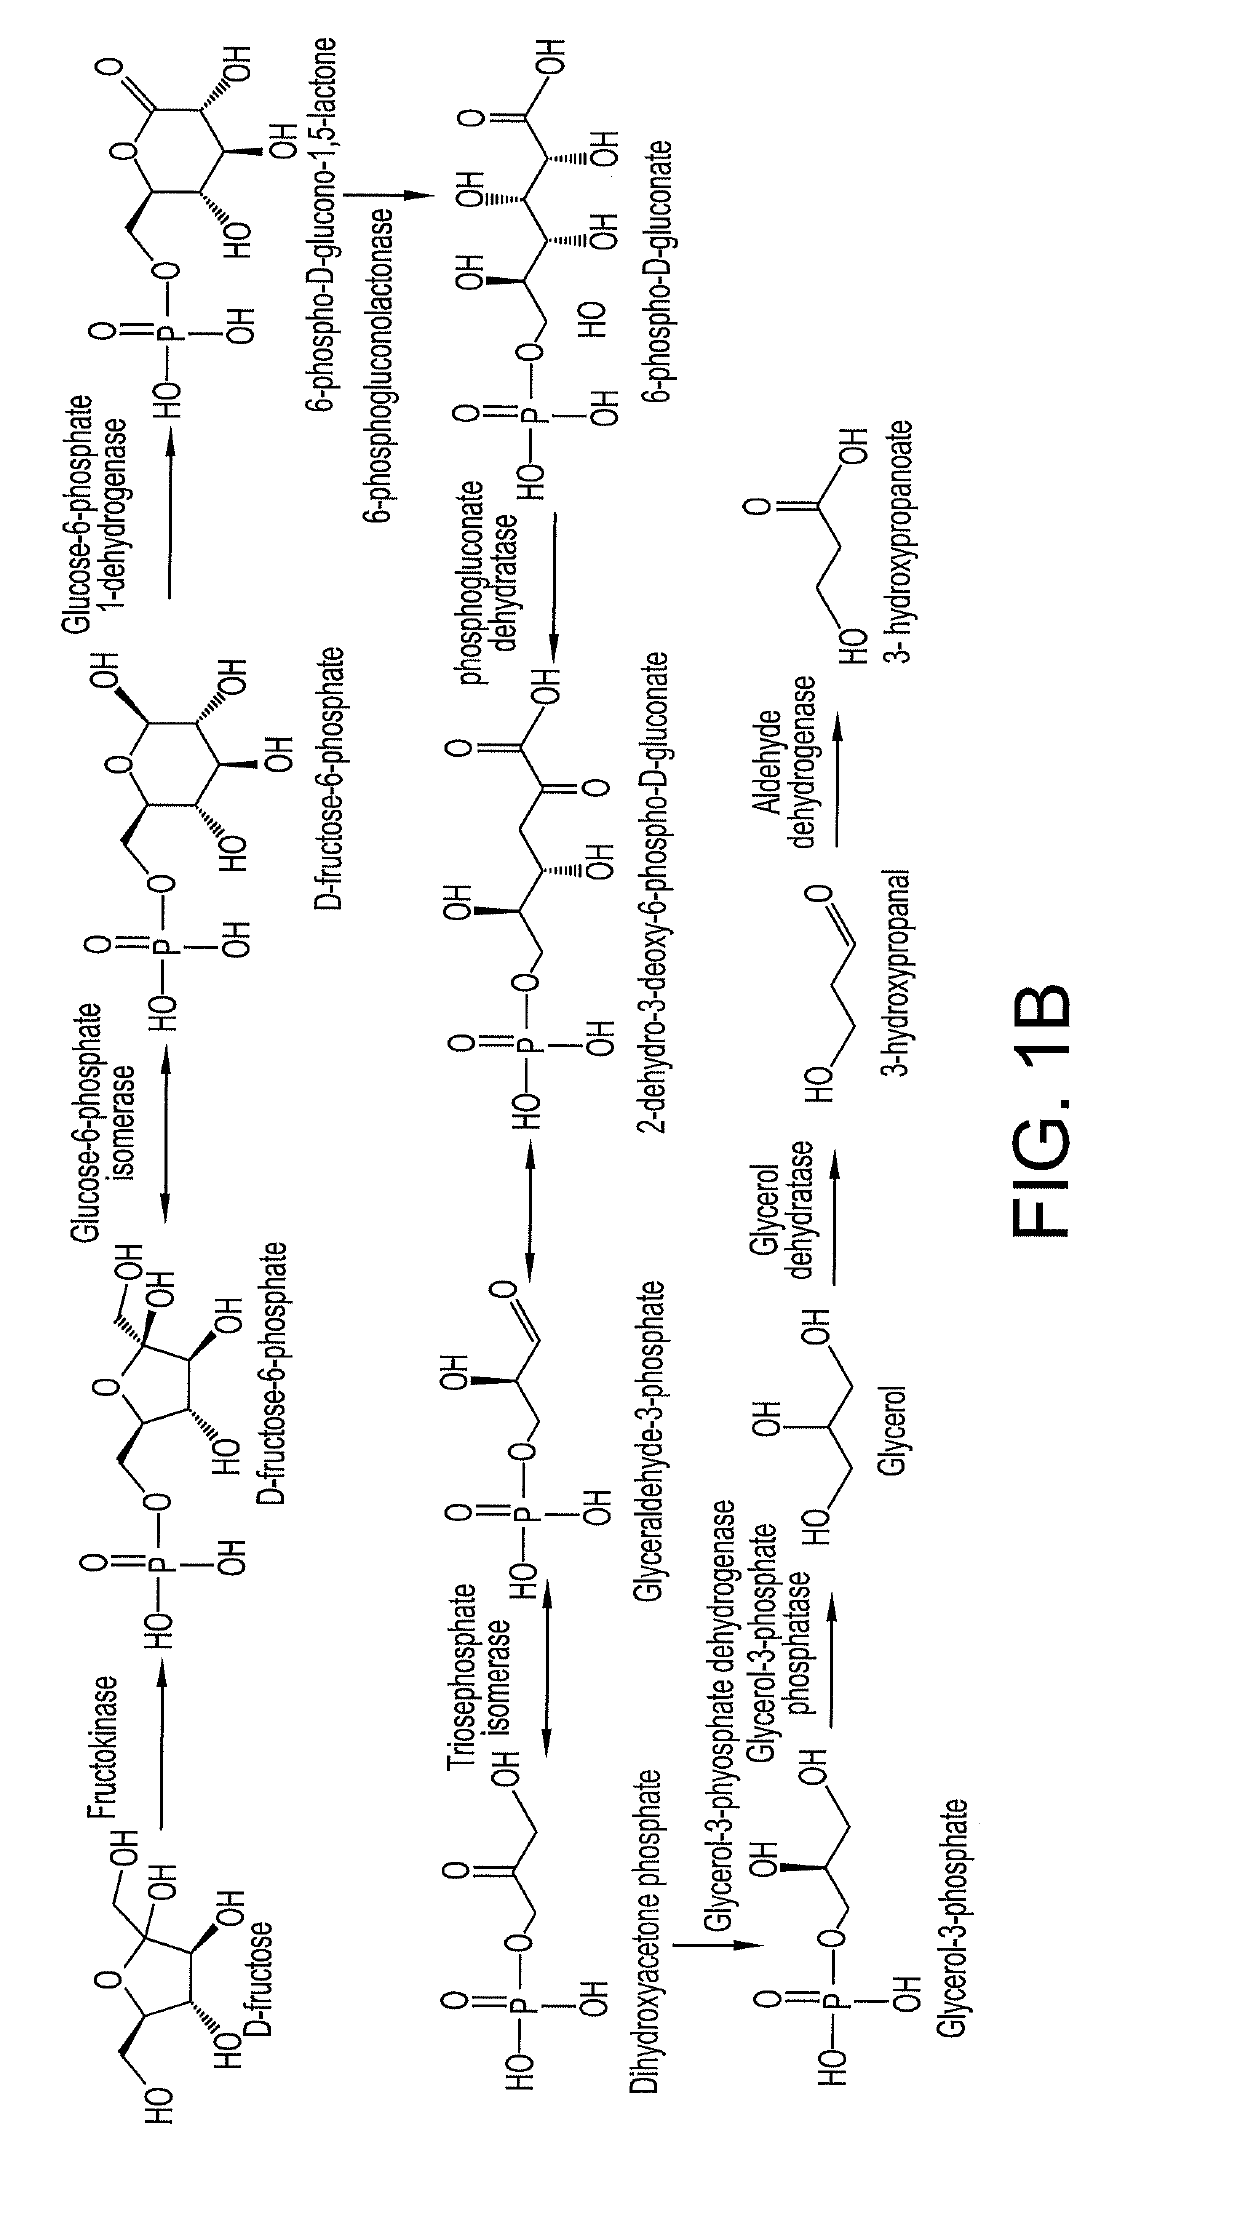 Methods and materials for the biosynthesis of beta hydroxy acids and/or derivatives thereof and/or compounds related thereto